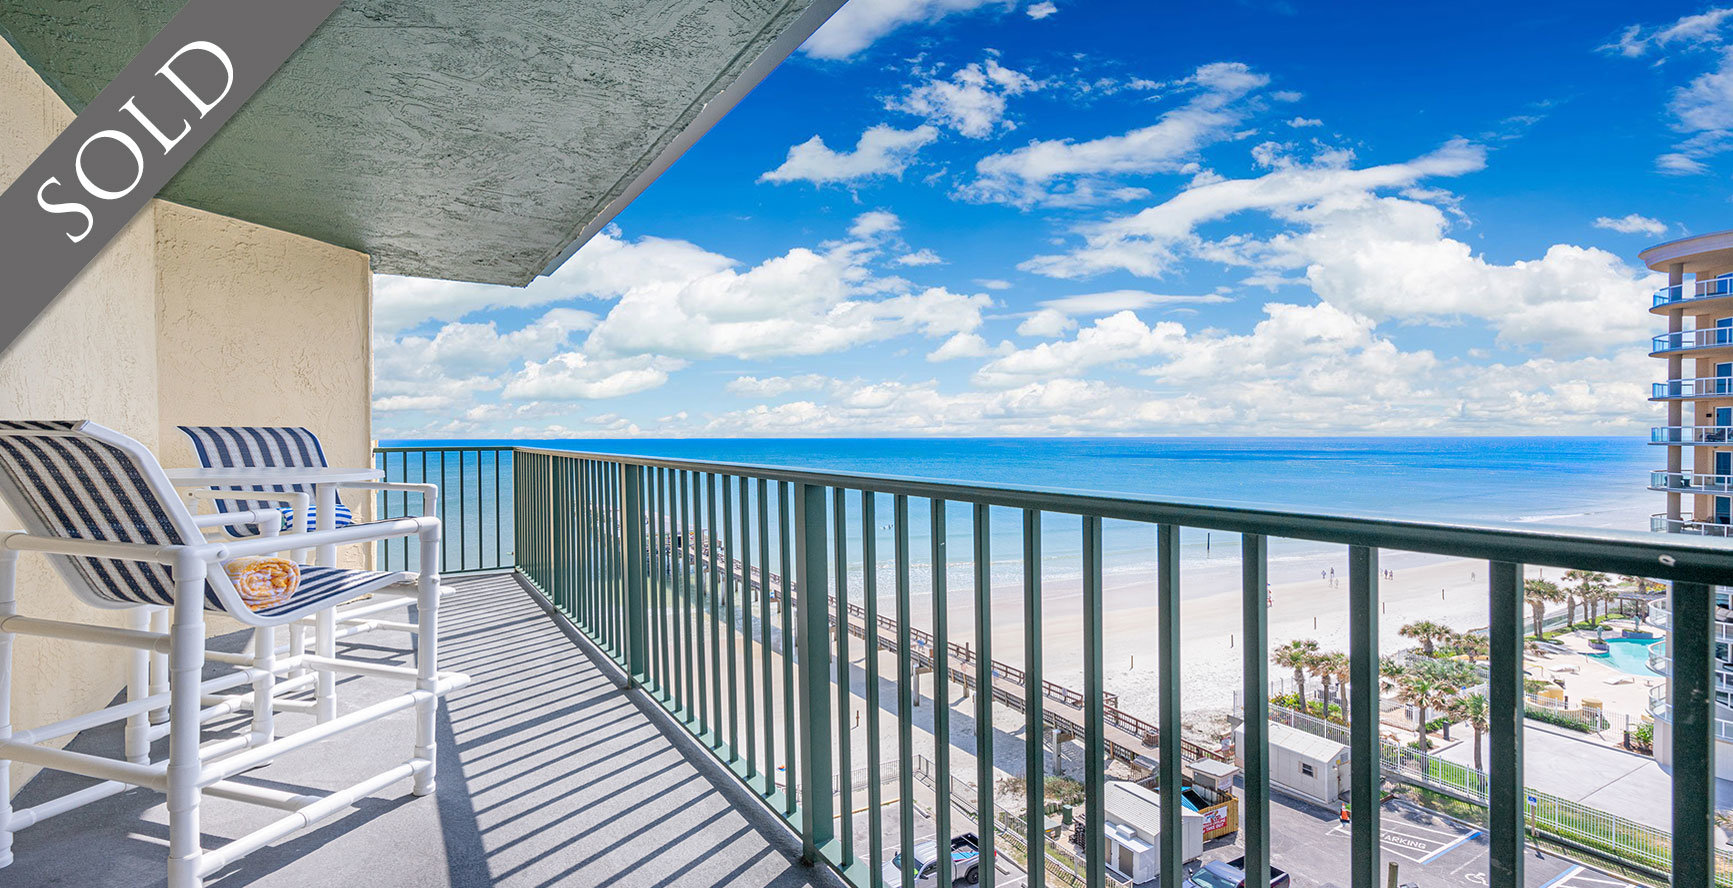 Sunglow oceanfront condos For Sale. Just Sold 3647 S Atlantic Ave Daytona Beach  Shores The LUXE Group 386-299-4043